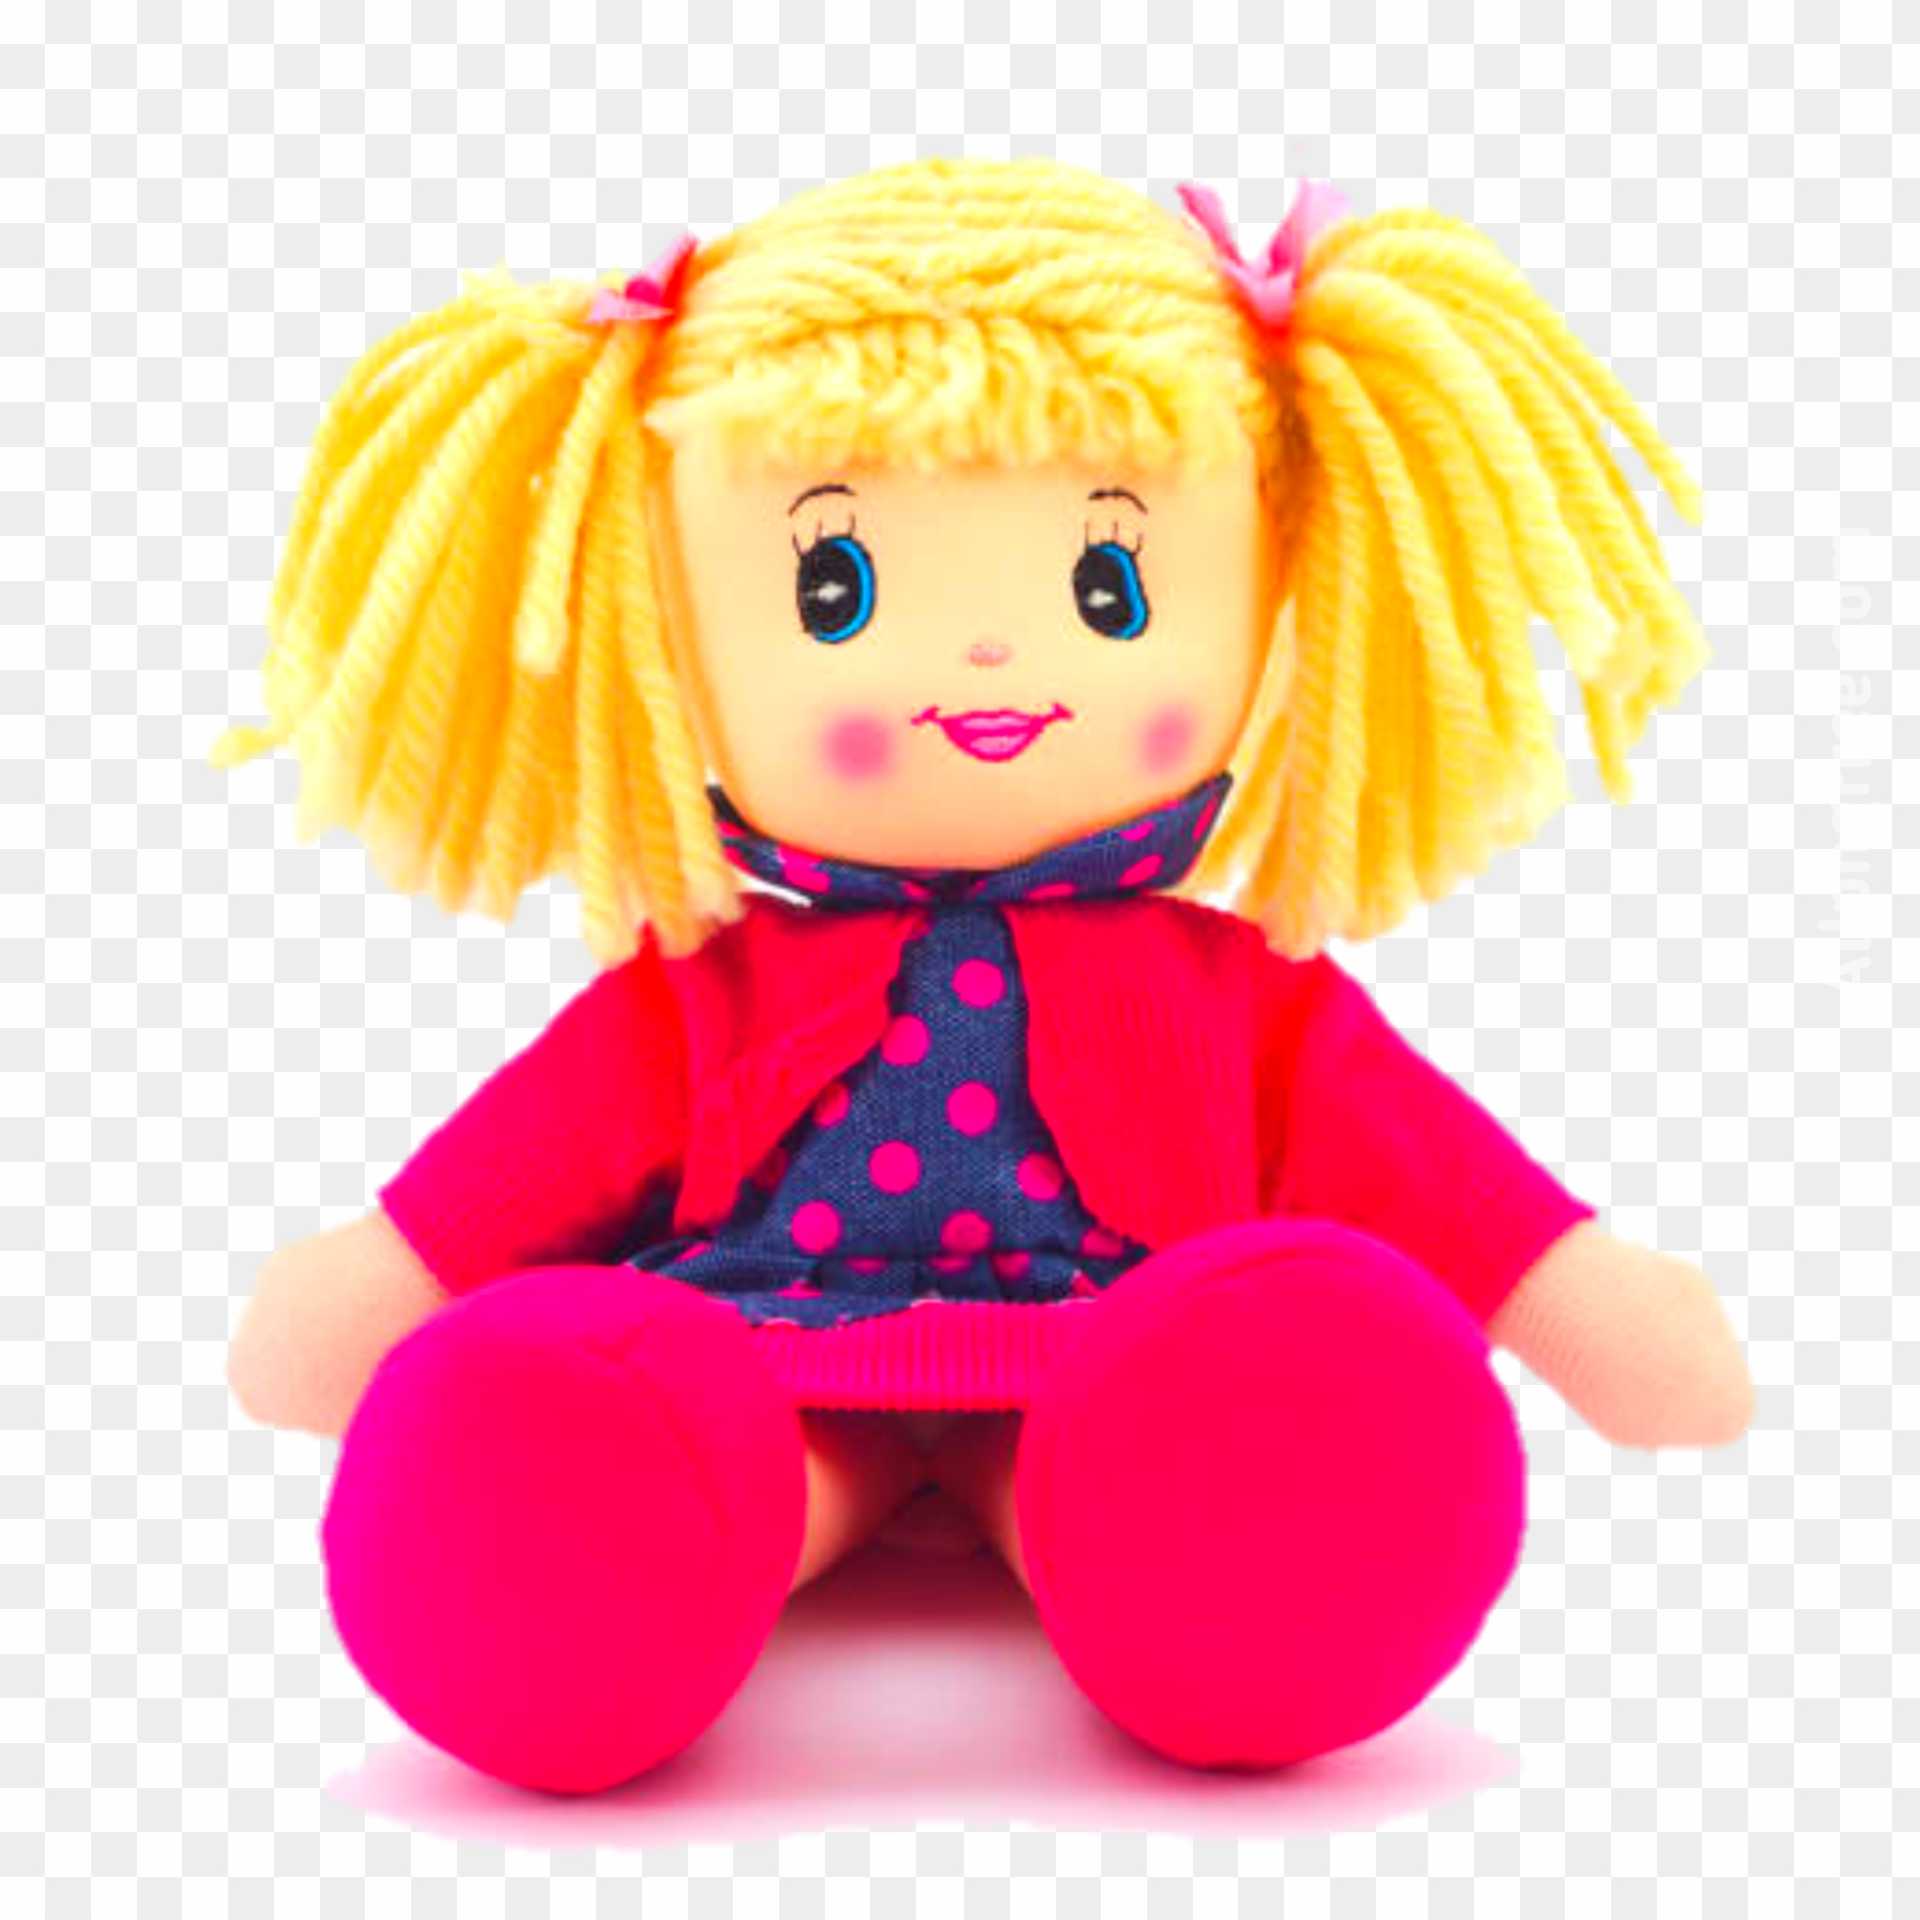 Doll png 